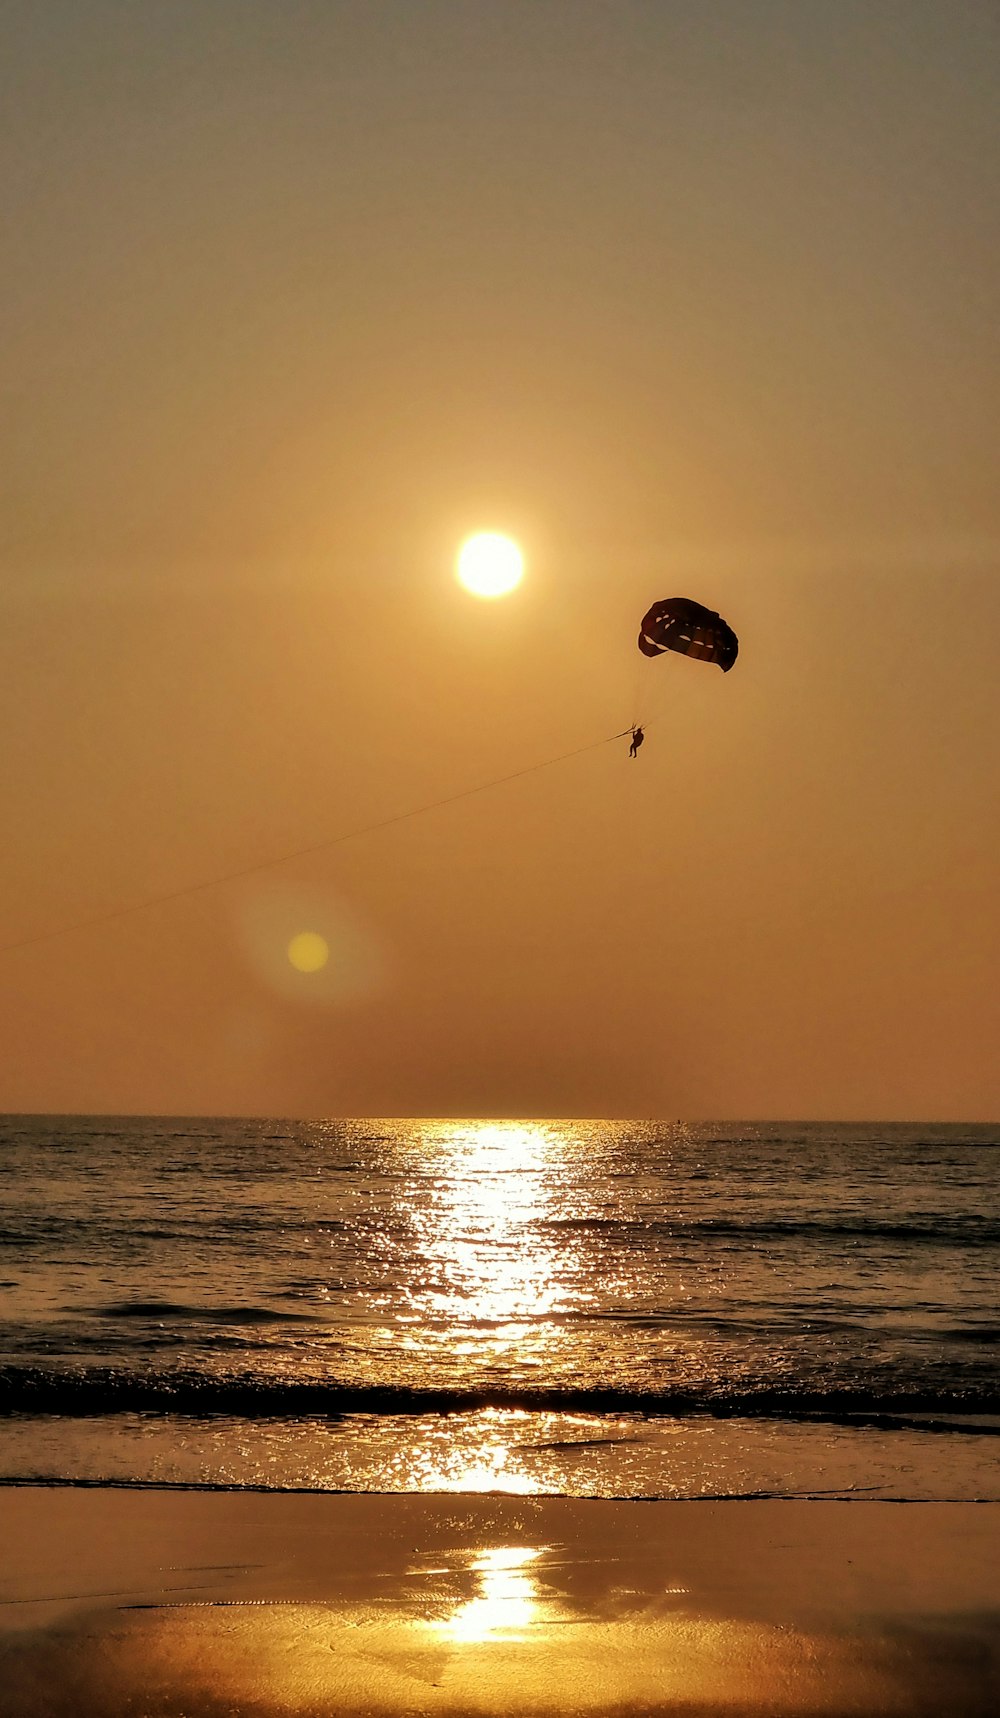 a person parasailing on the beach